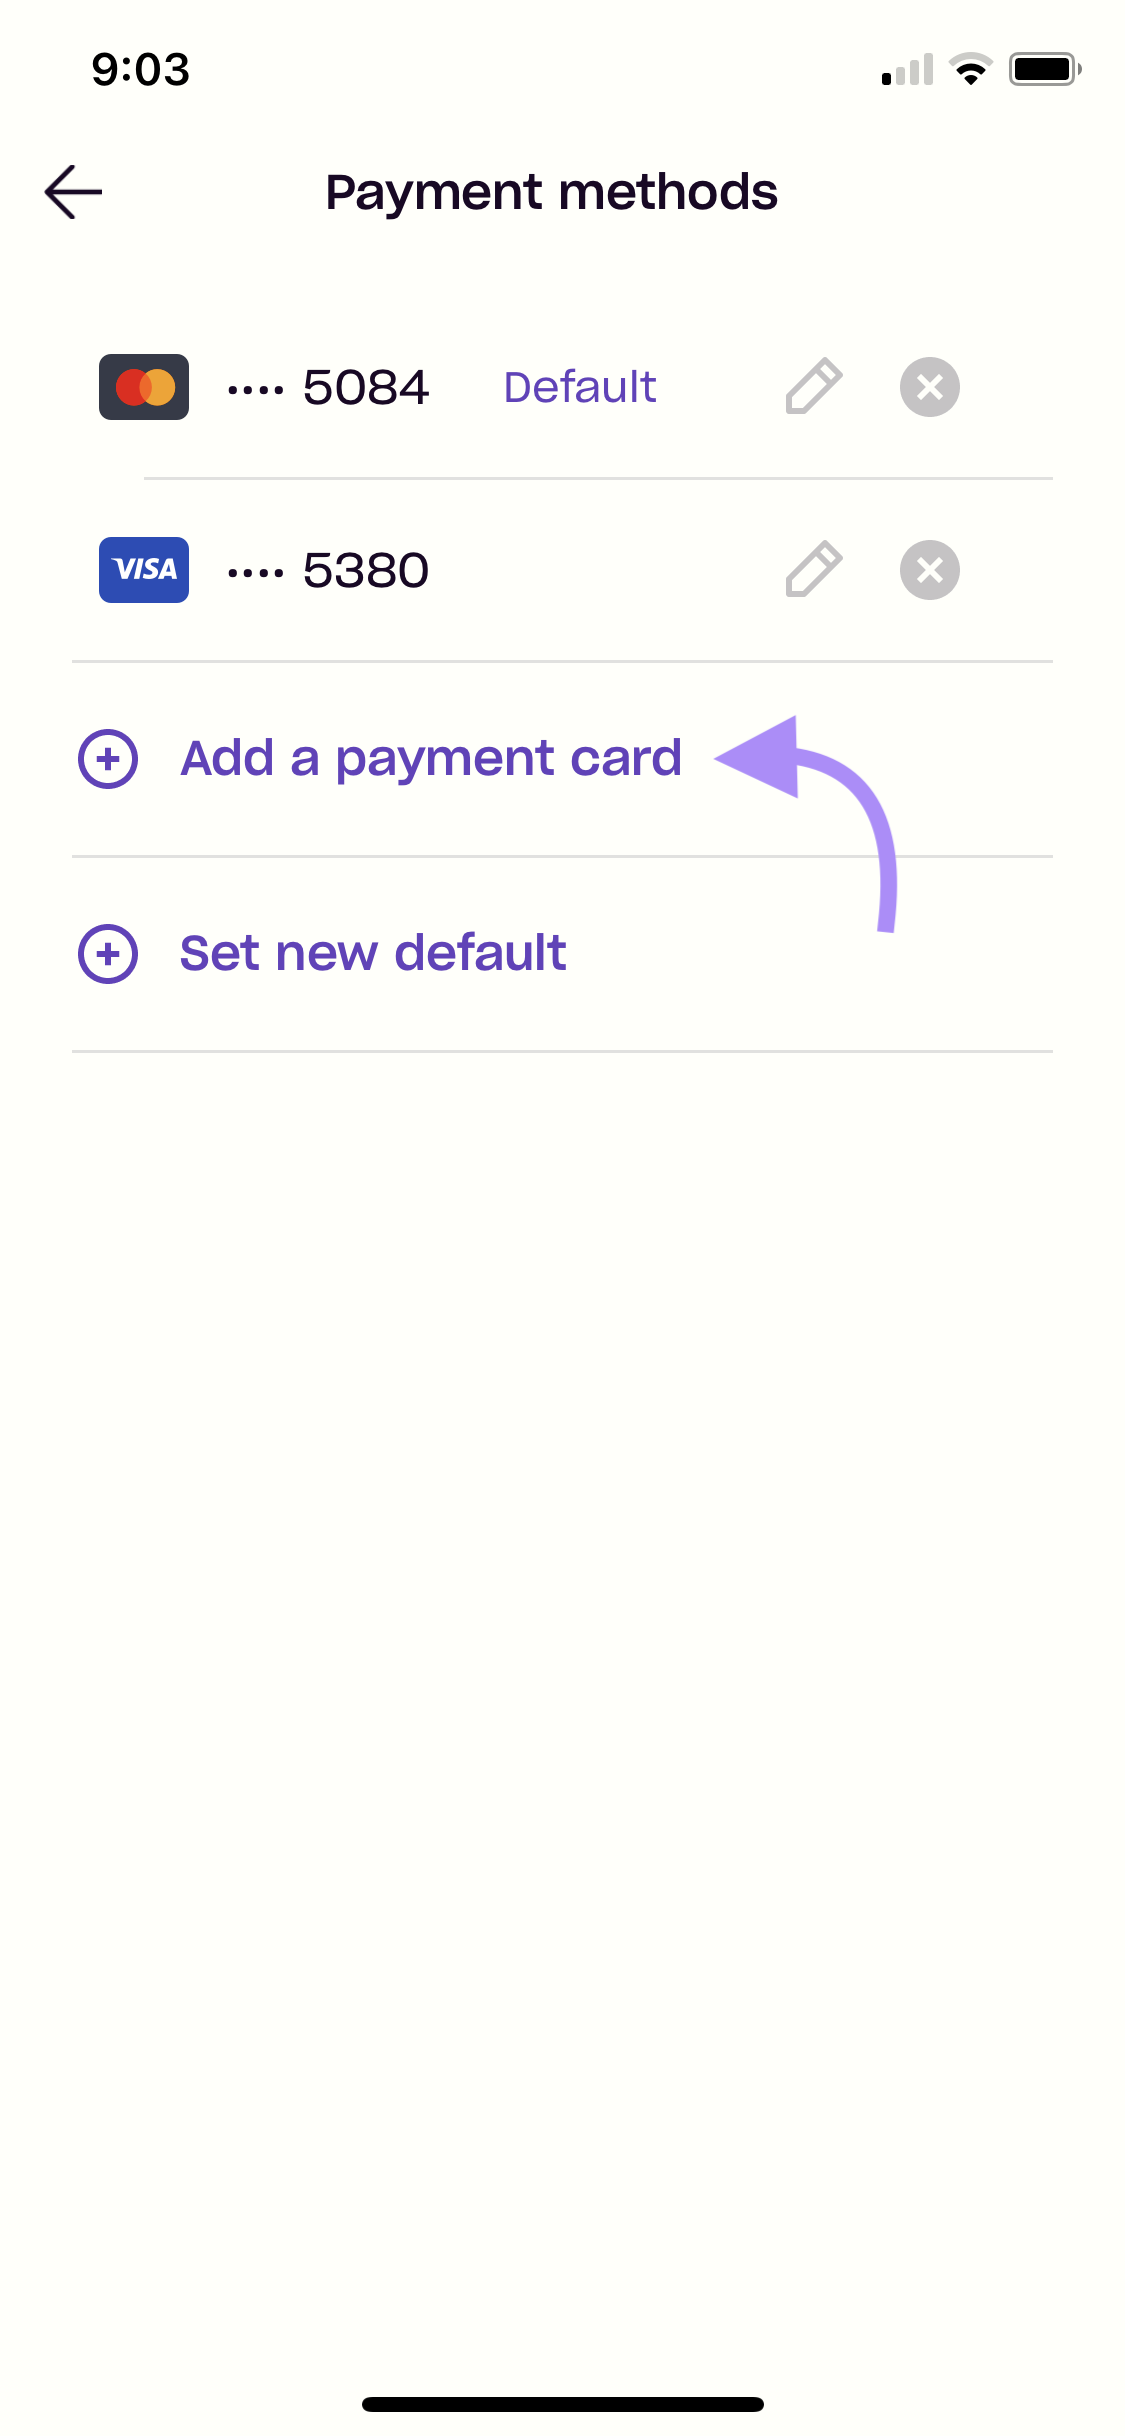 How_do_I_add_a_new_payment_card_int_the_zip_app_1.png